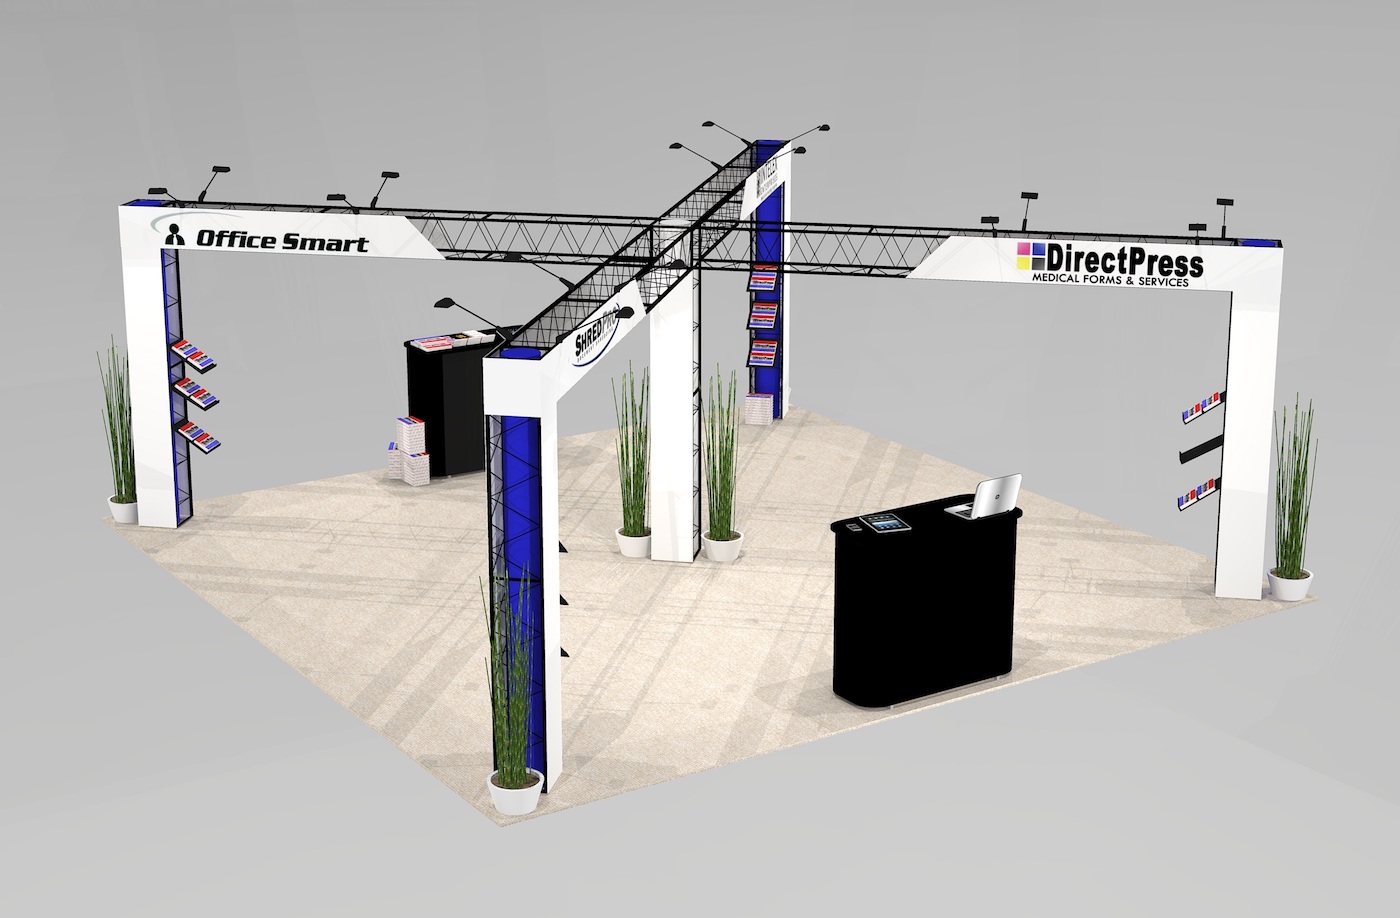 Trade show exhibit rental design has a tool less set up and has a very flexible design headers on all sides plus two display podium counters and literature shelves